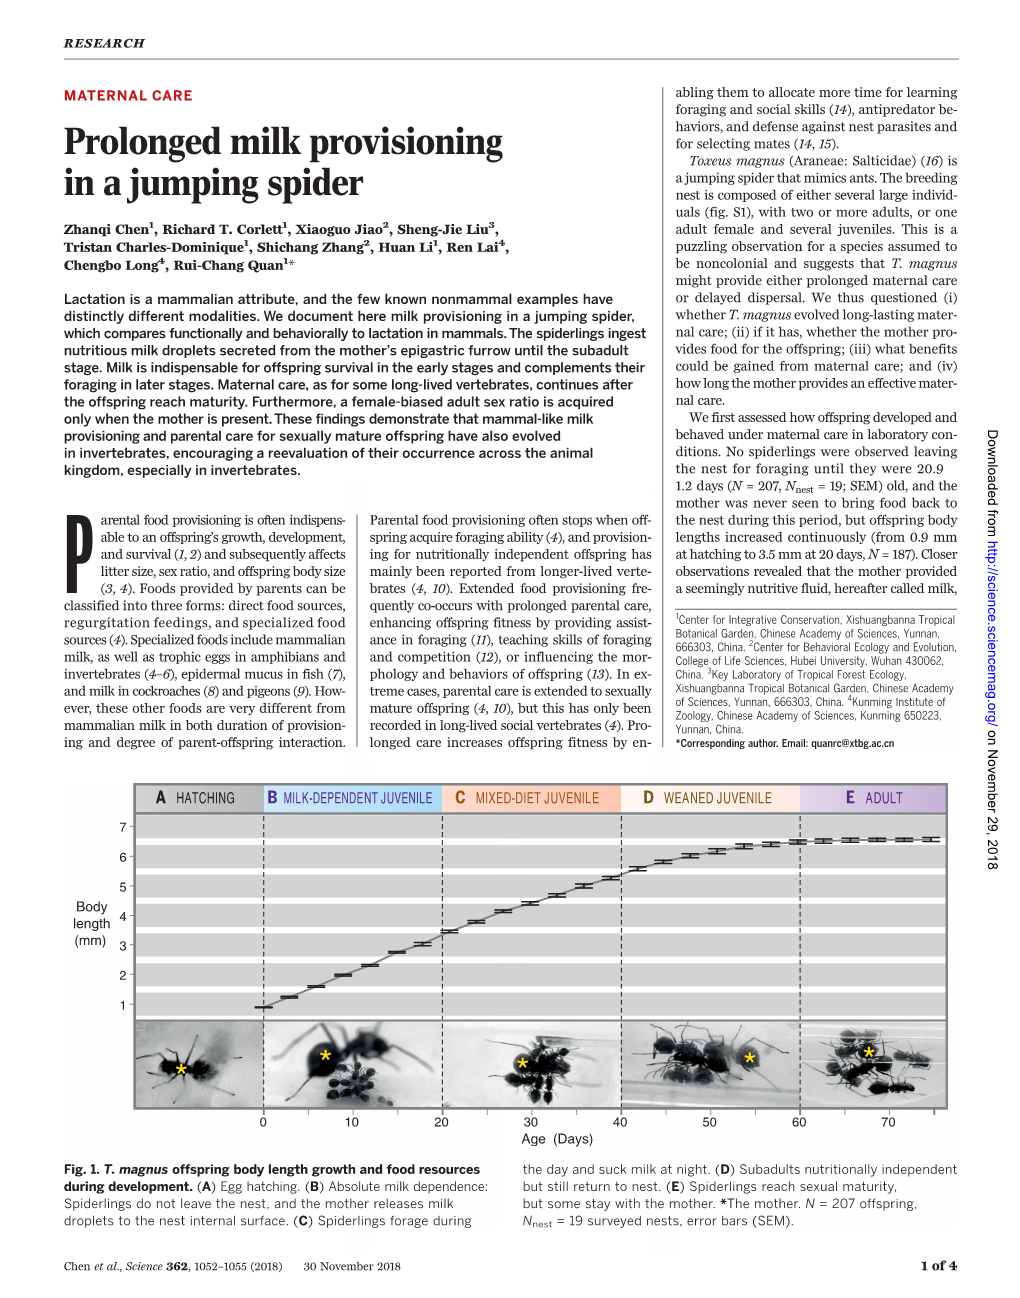 Prolonged Milk Provisioning in a Jumping Spider Zhanqi Chen, Richard T